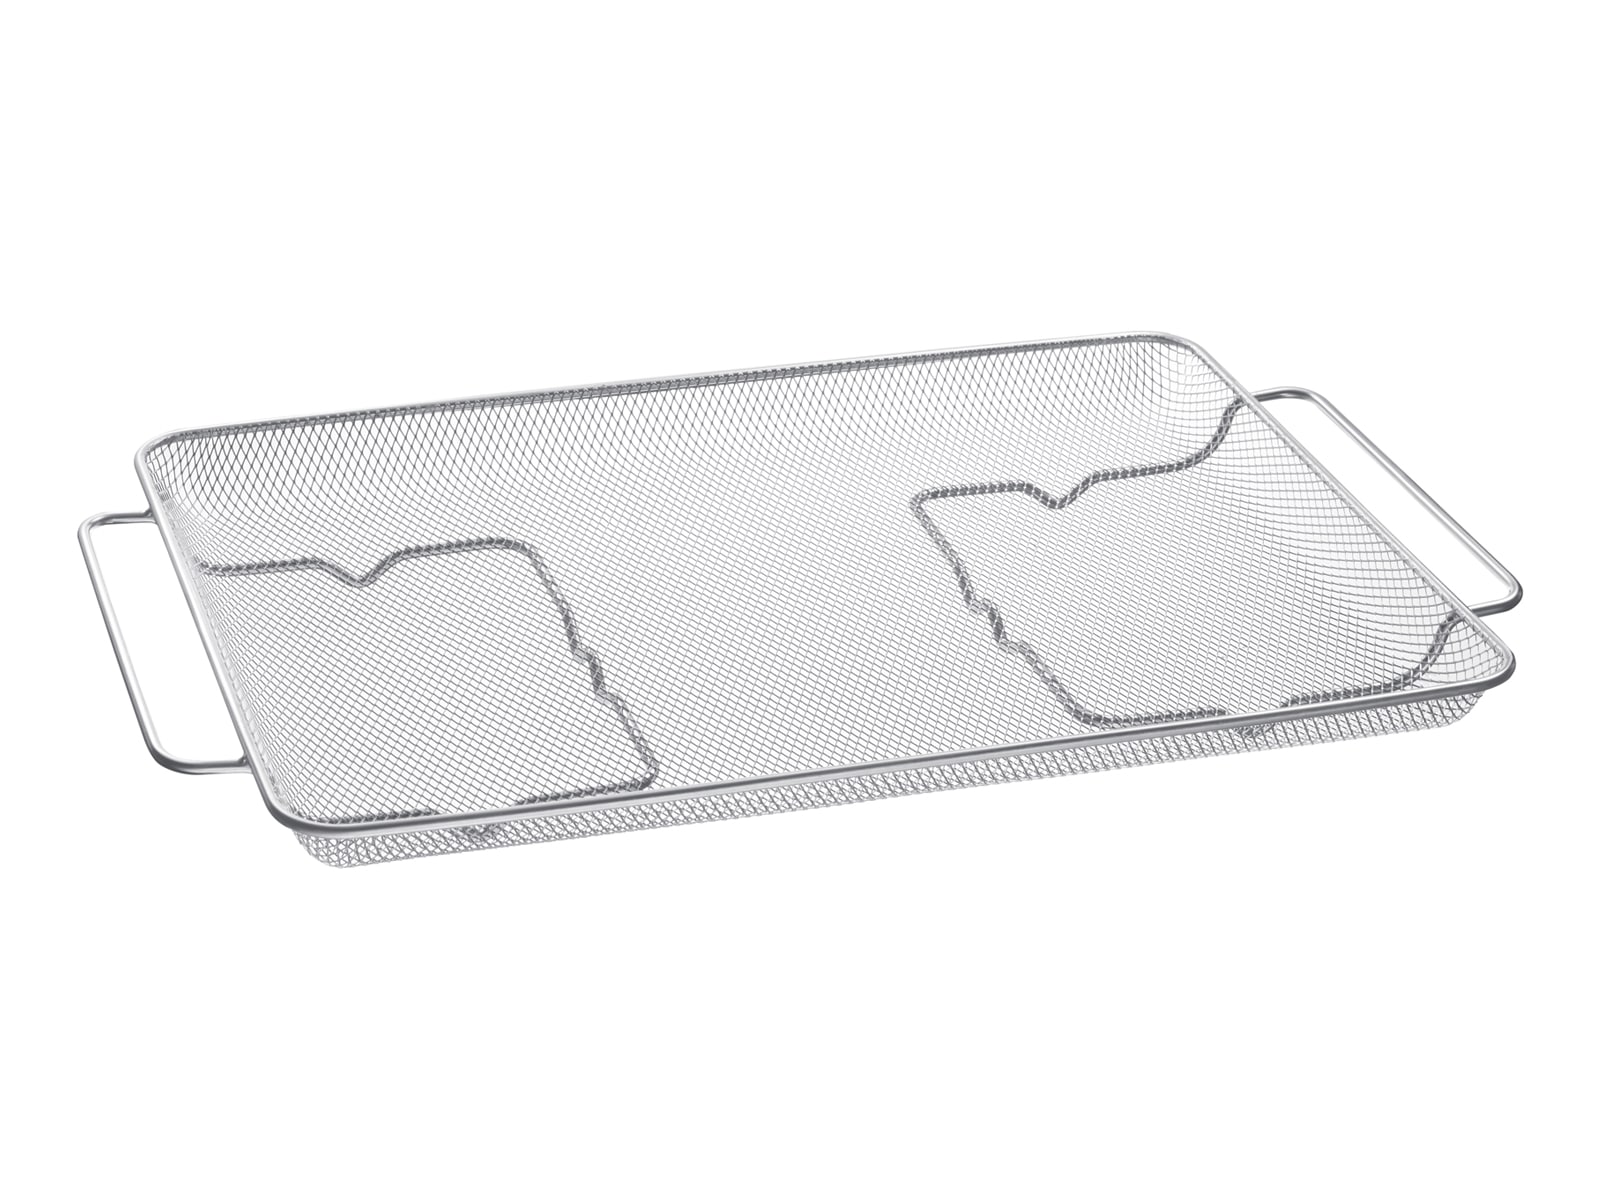 FG24AIRFTRY by Frigidaire - Frigidaire ReadyCook™ 24 Wall Oven Air Fry Tray